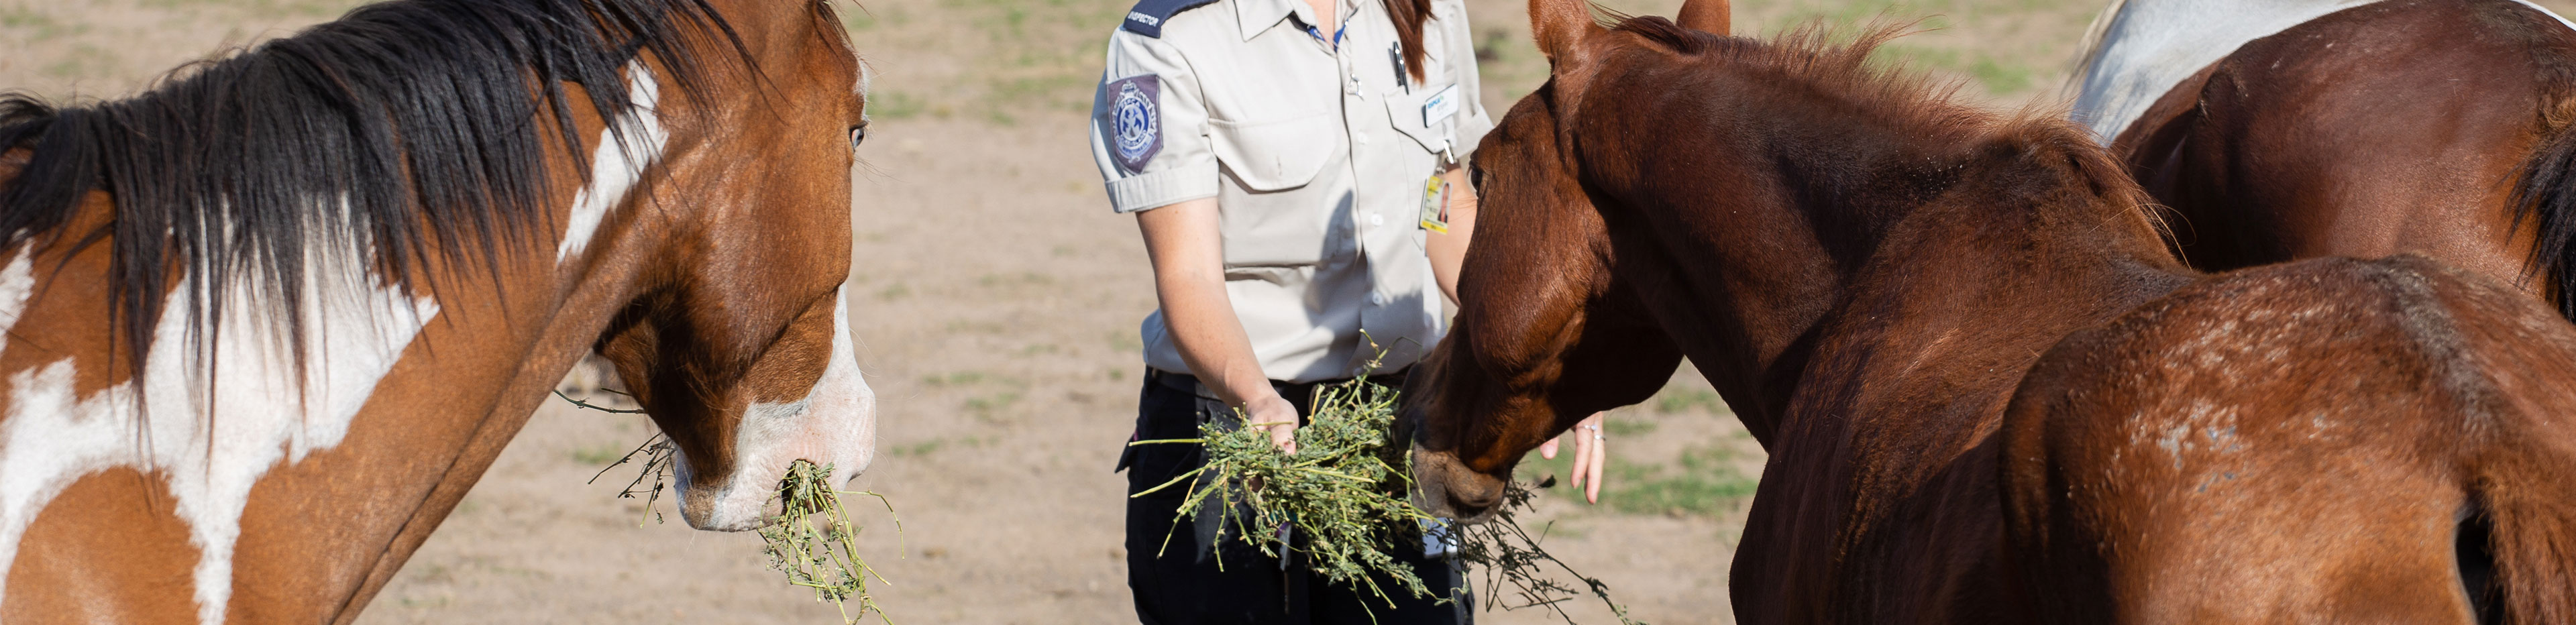 rspca caring for horses